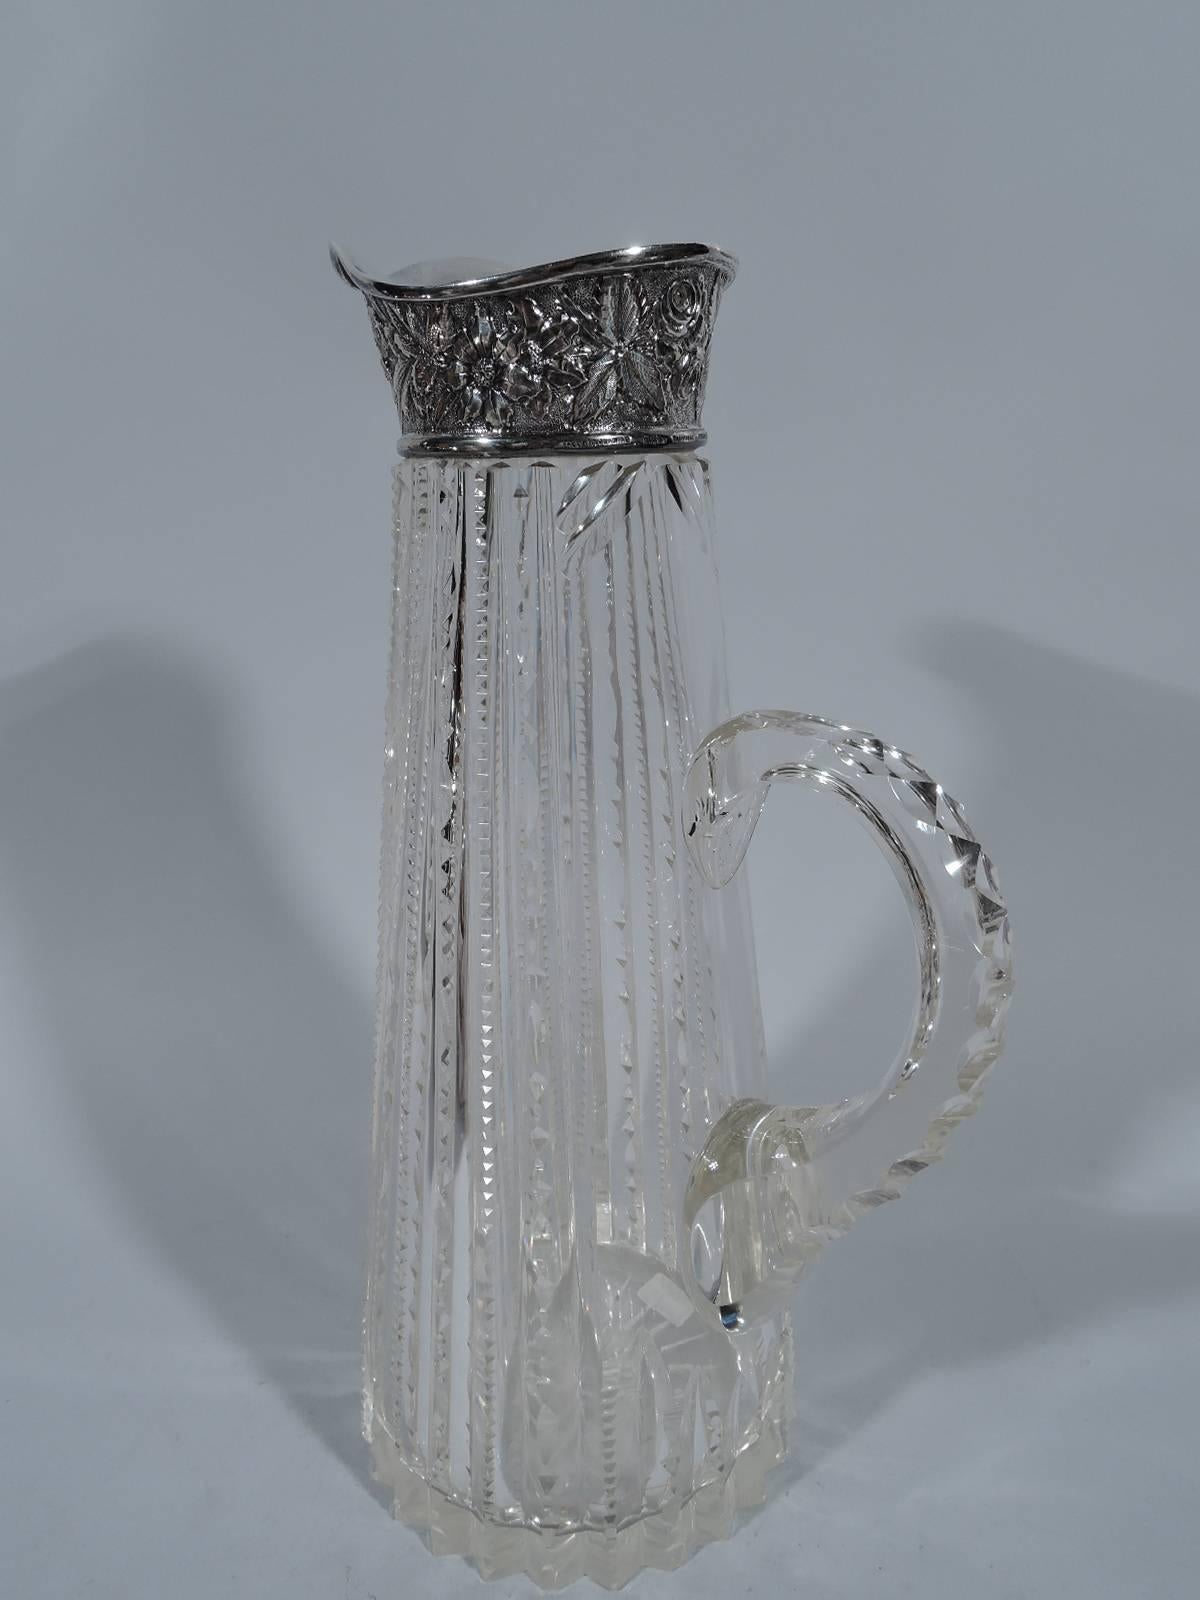 Brilliant-cut-glass and sterling silver claret jug. Made by Jacobi & Jenkins in Baltimore, circa 1900. Conical with geometric ornament and contrasting repousse silver collar. Faceted C-scroll handle. A beautiful combination of technique and texture.